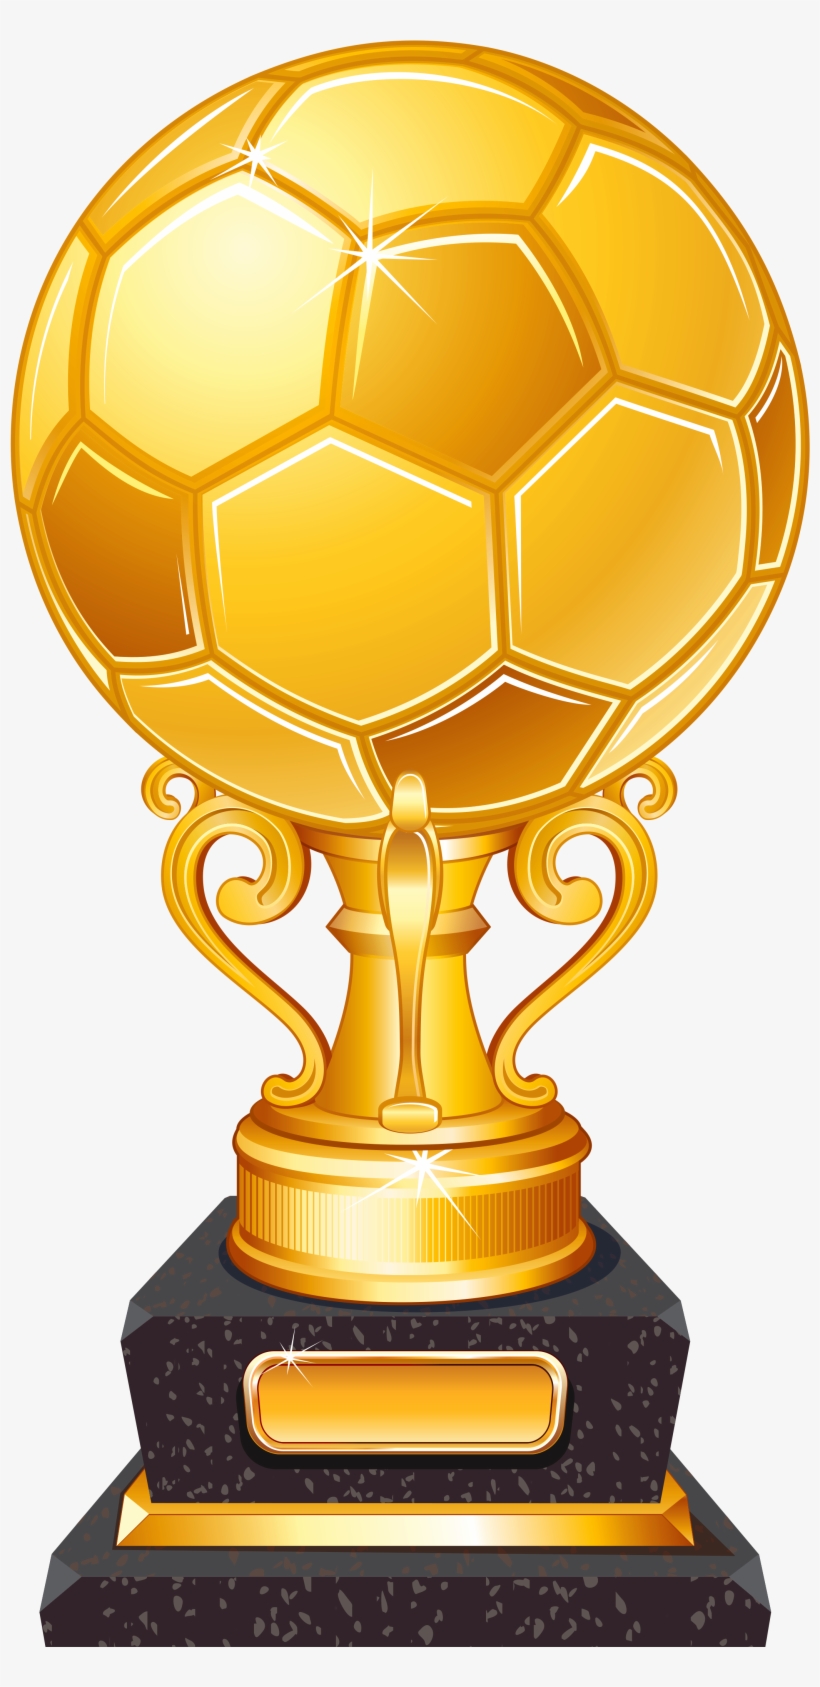 Fifa Cup Award Clipart Free Download - Soccer Trophy Clipart, transparent png #77439